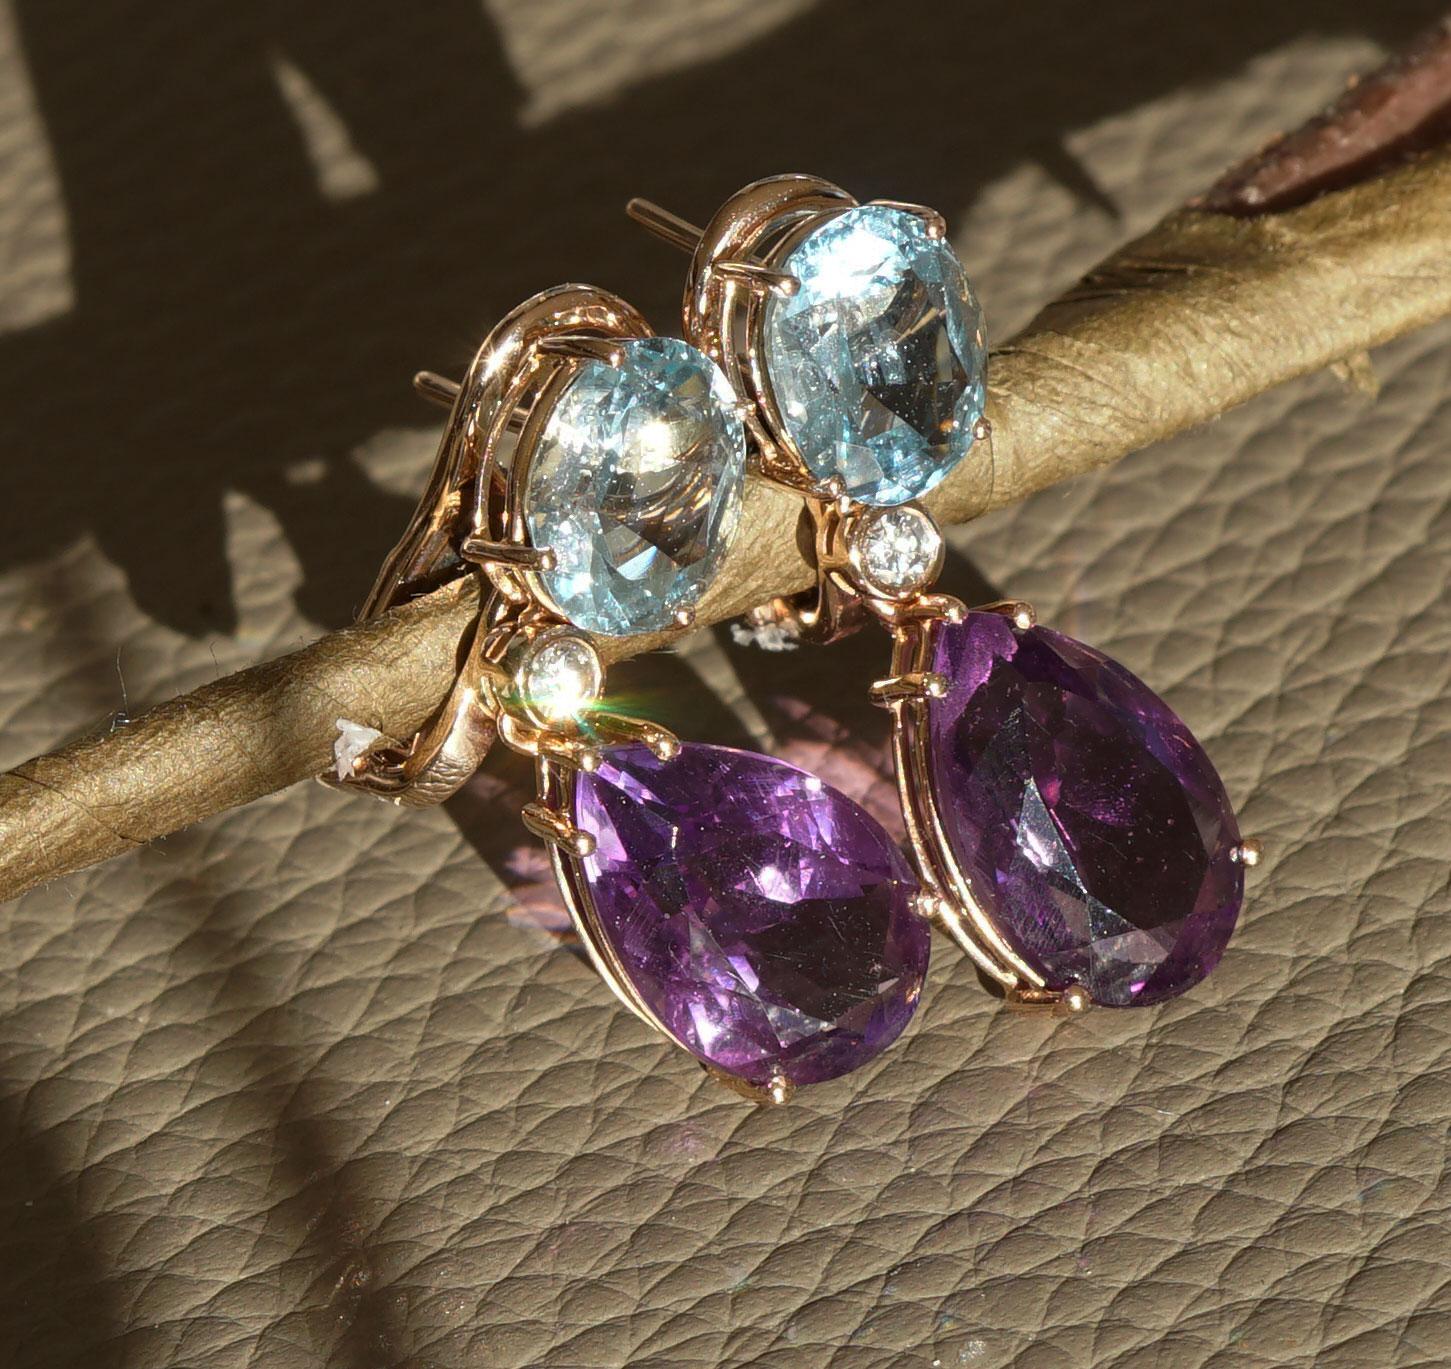 Oval Cut Aquamarin Amethyst Diamond Earrings 18kt Rosegold Great Quality from Madagascar For Sale